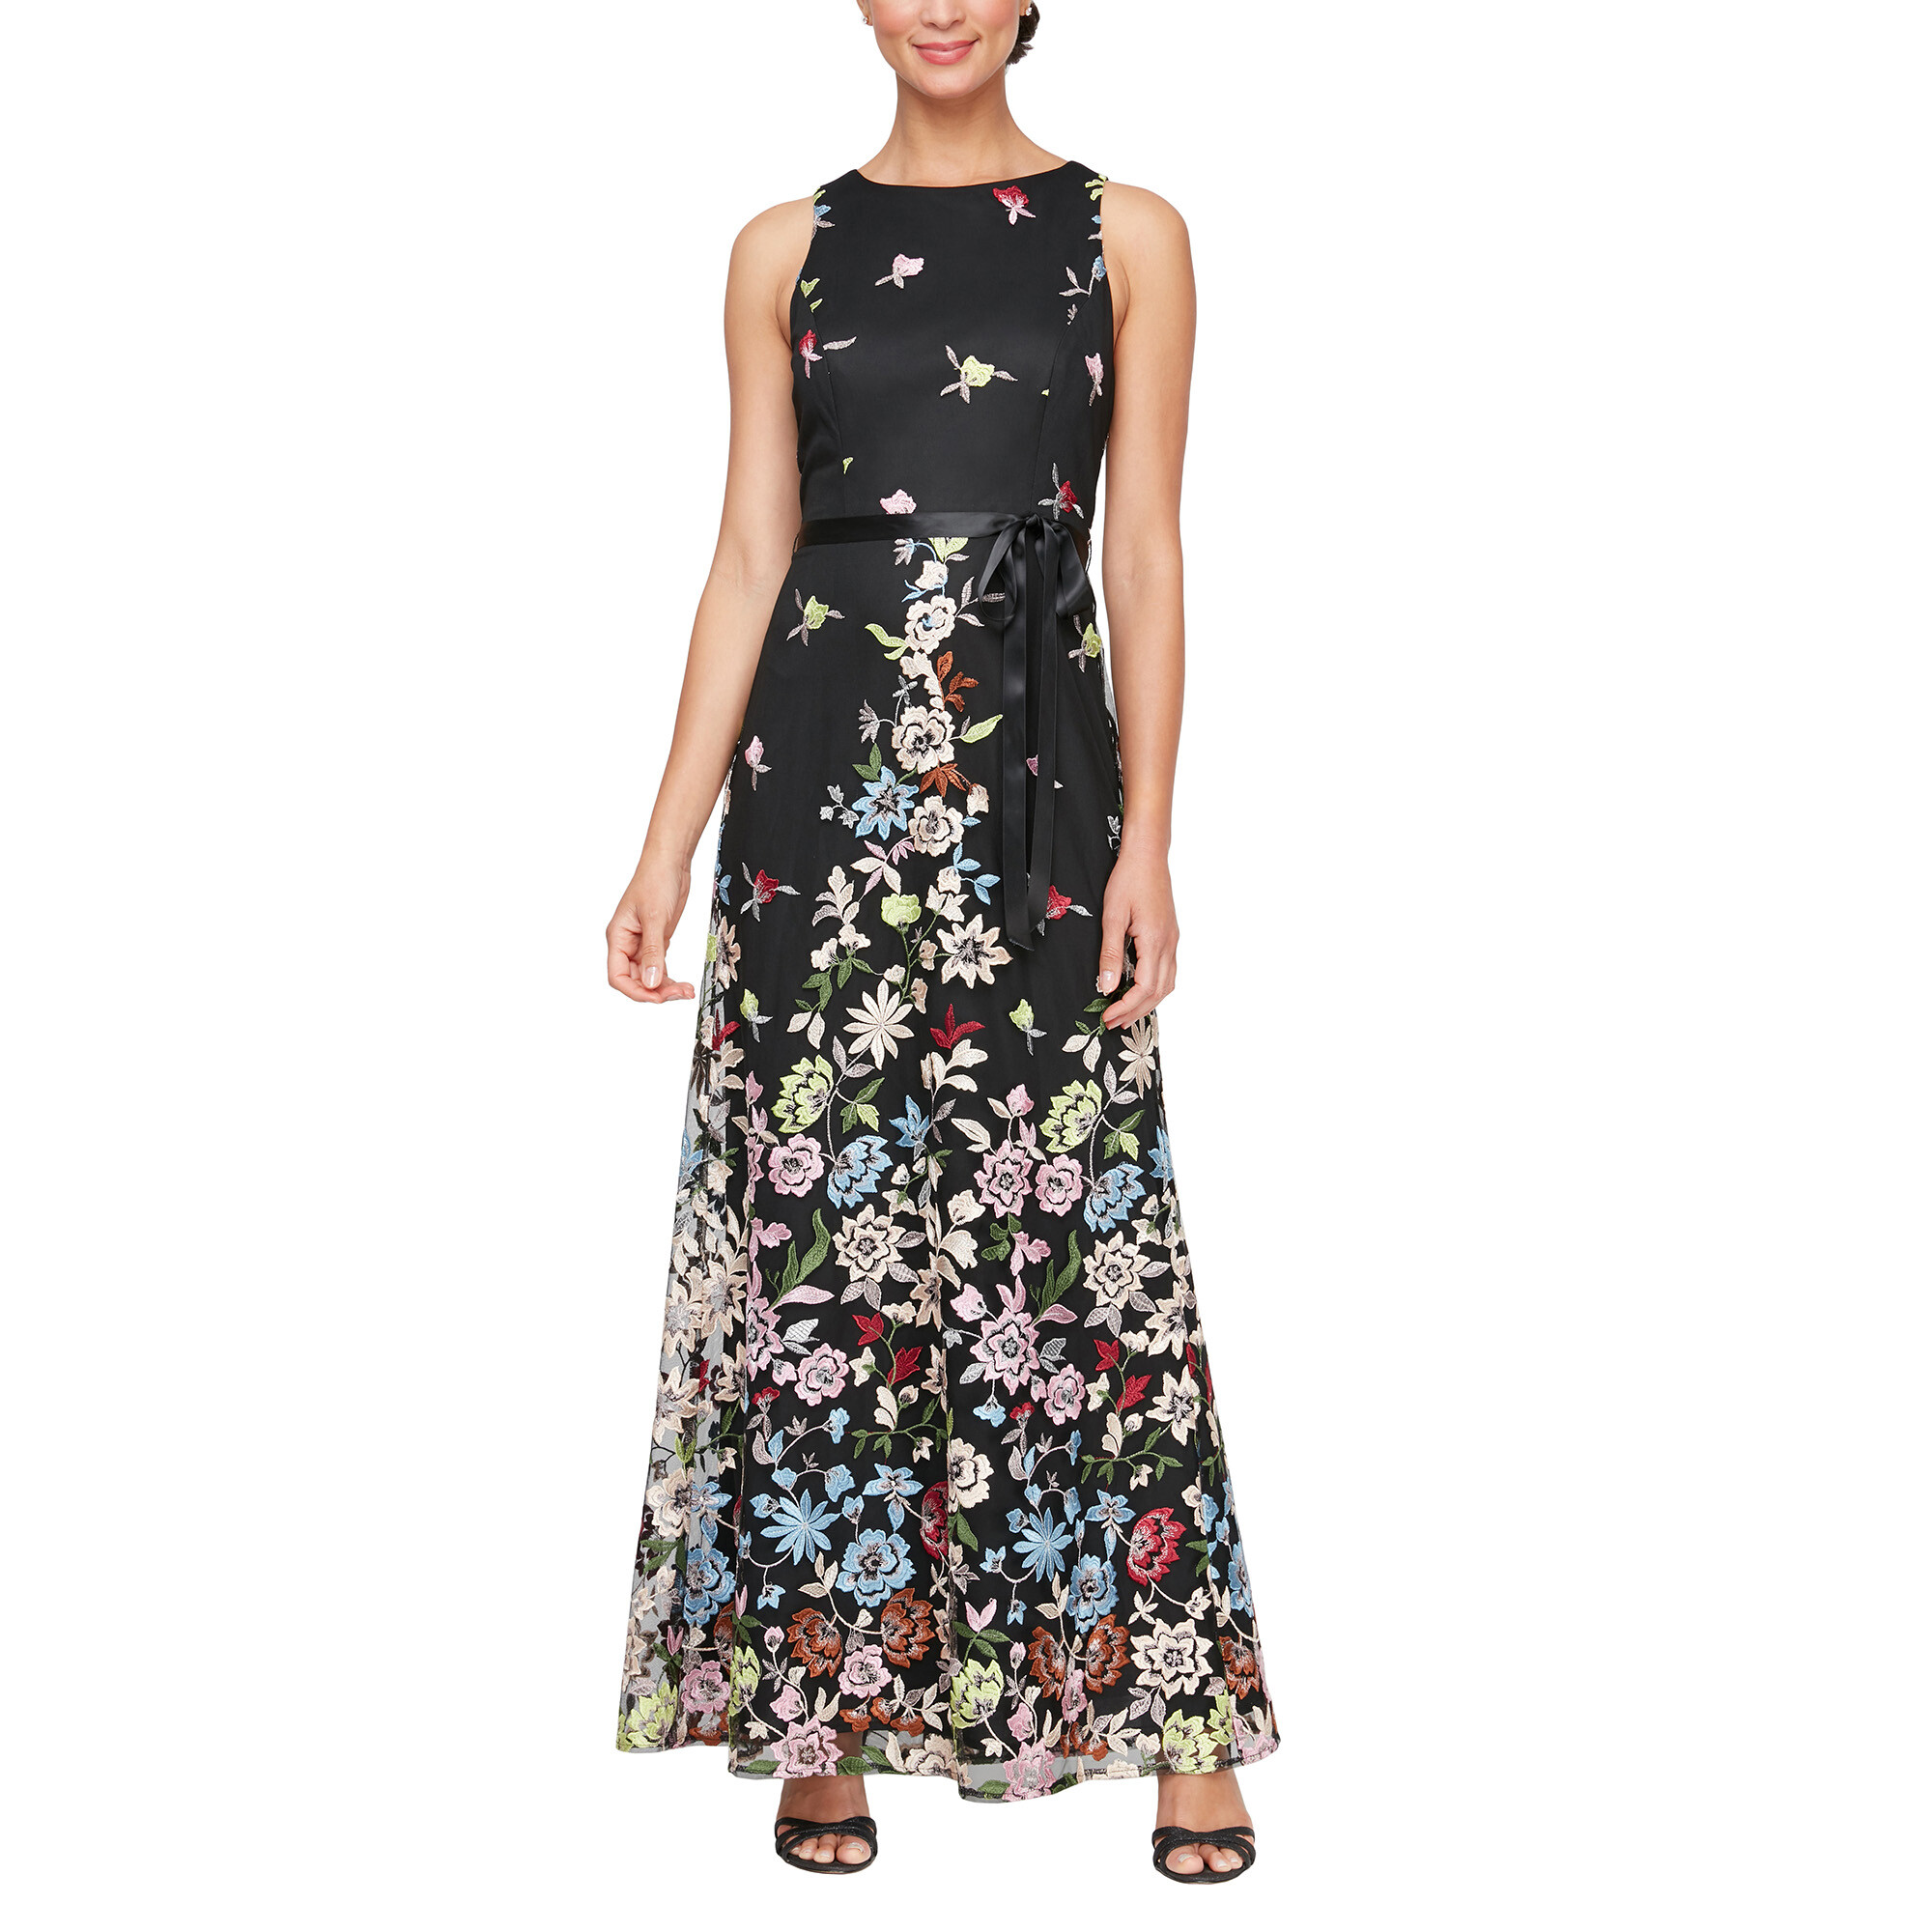 Incaltaminte Femei Under Armour Long Embroidered A-Line Dress with Satin Tie Belt Black Floral